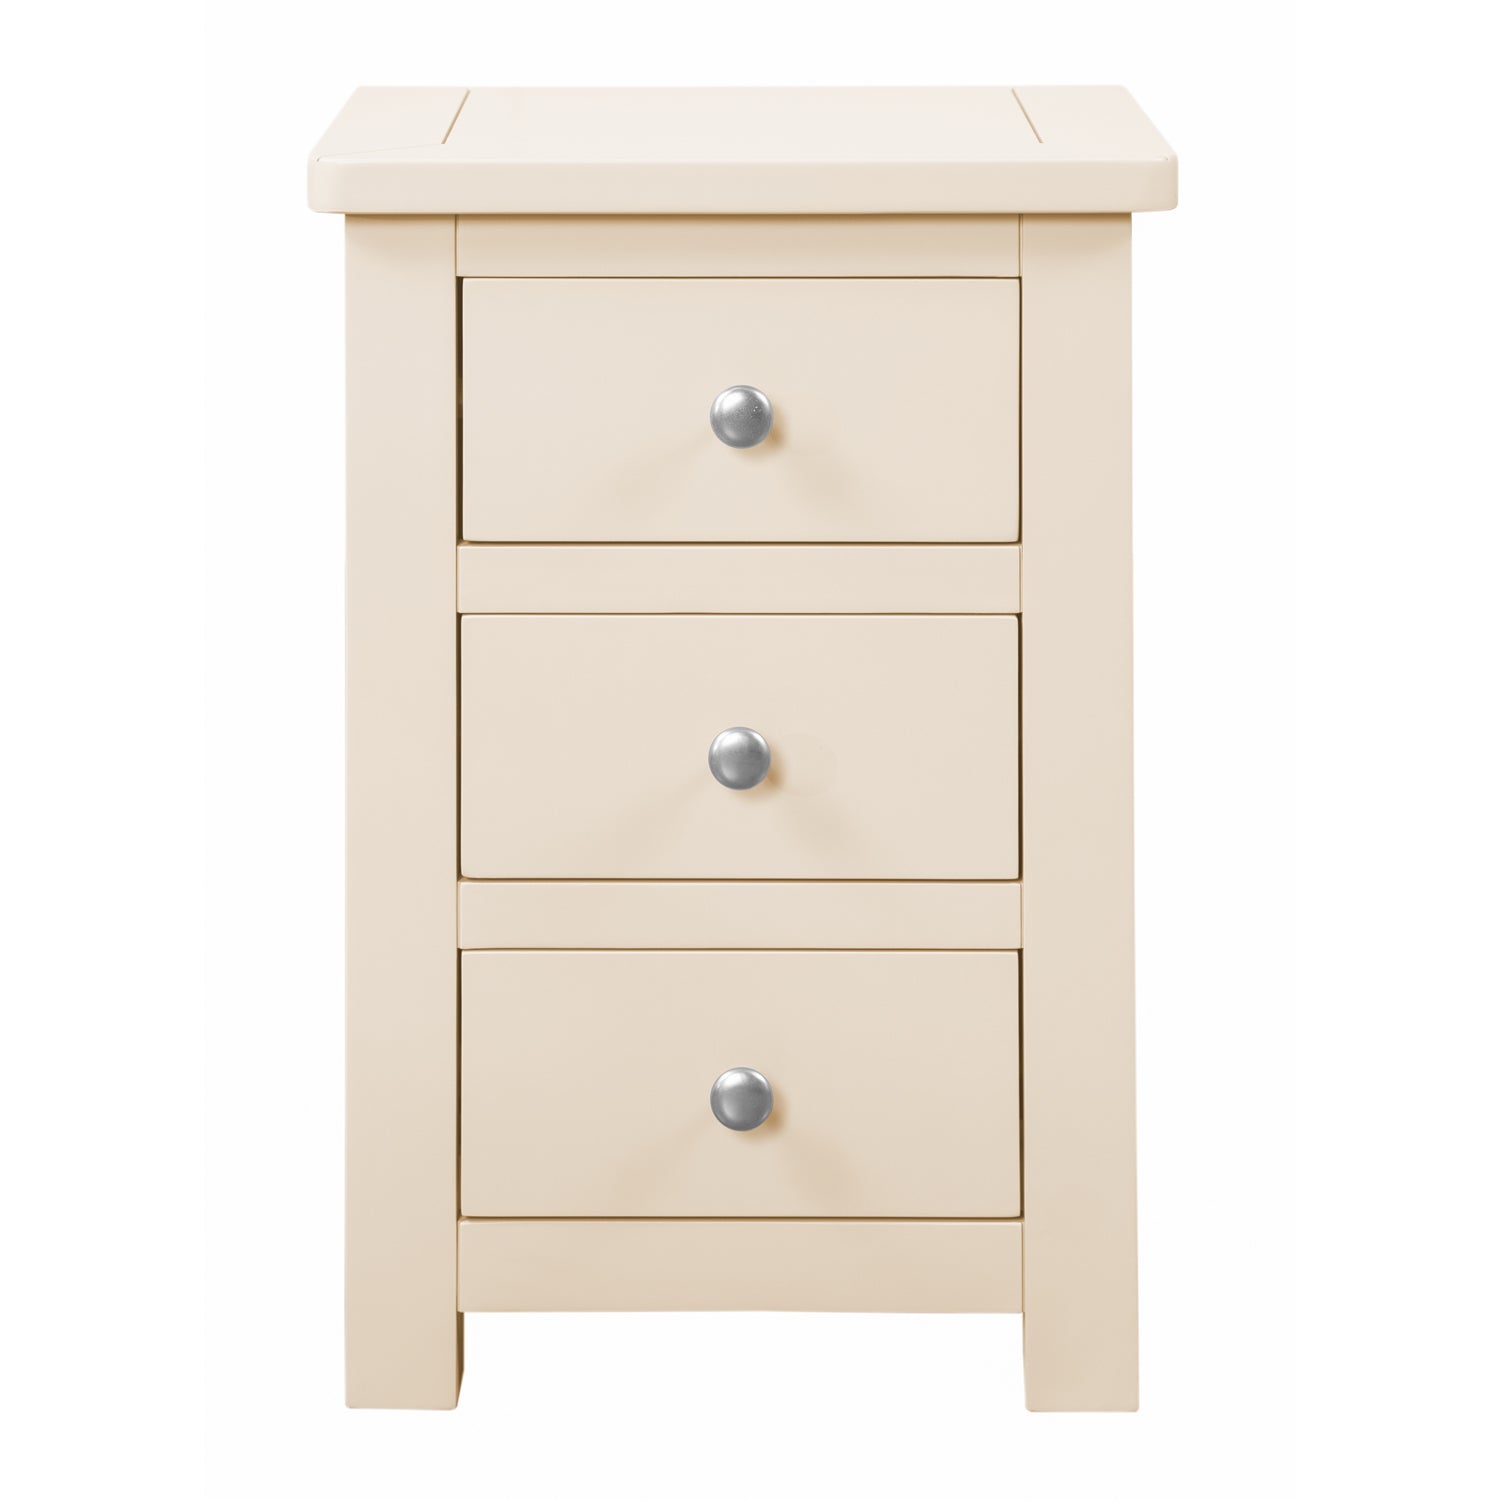 Manor Cream 3 Drawer Bedside Table